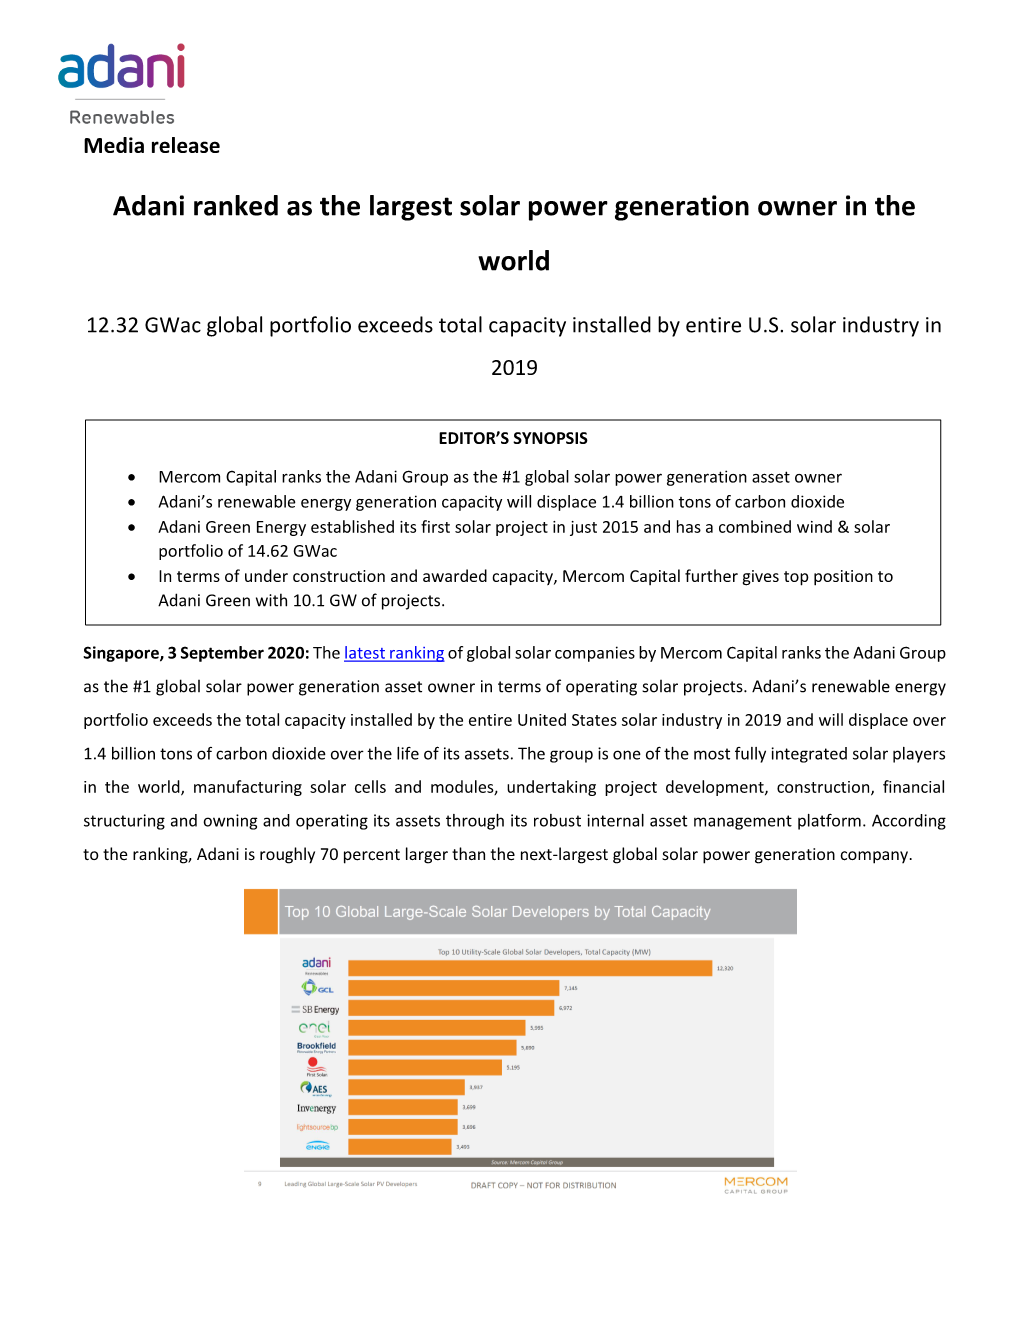 Adani Ranked As the Largest Solar Power Generation Owner in the World